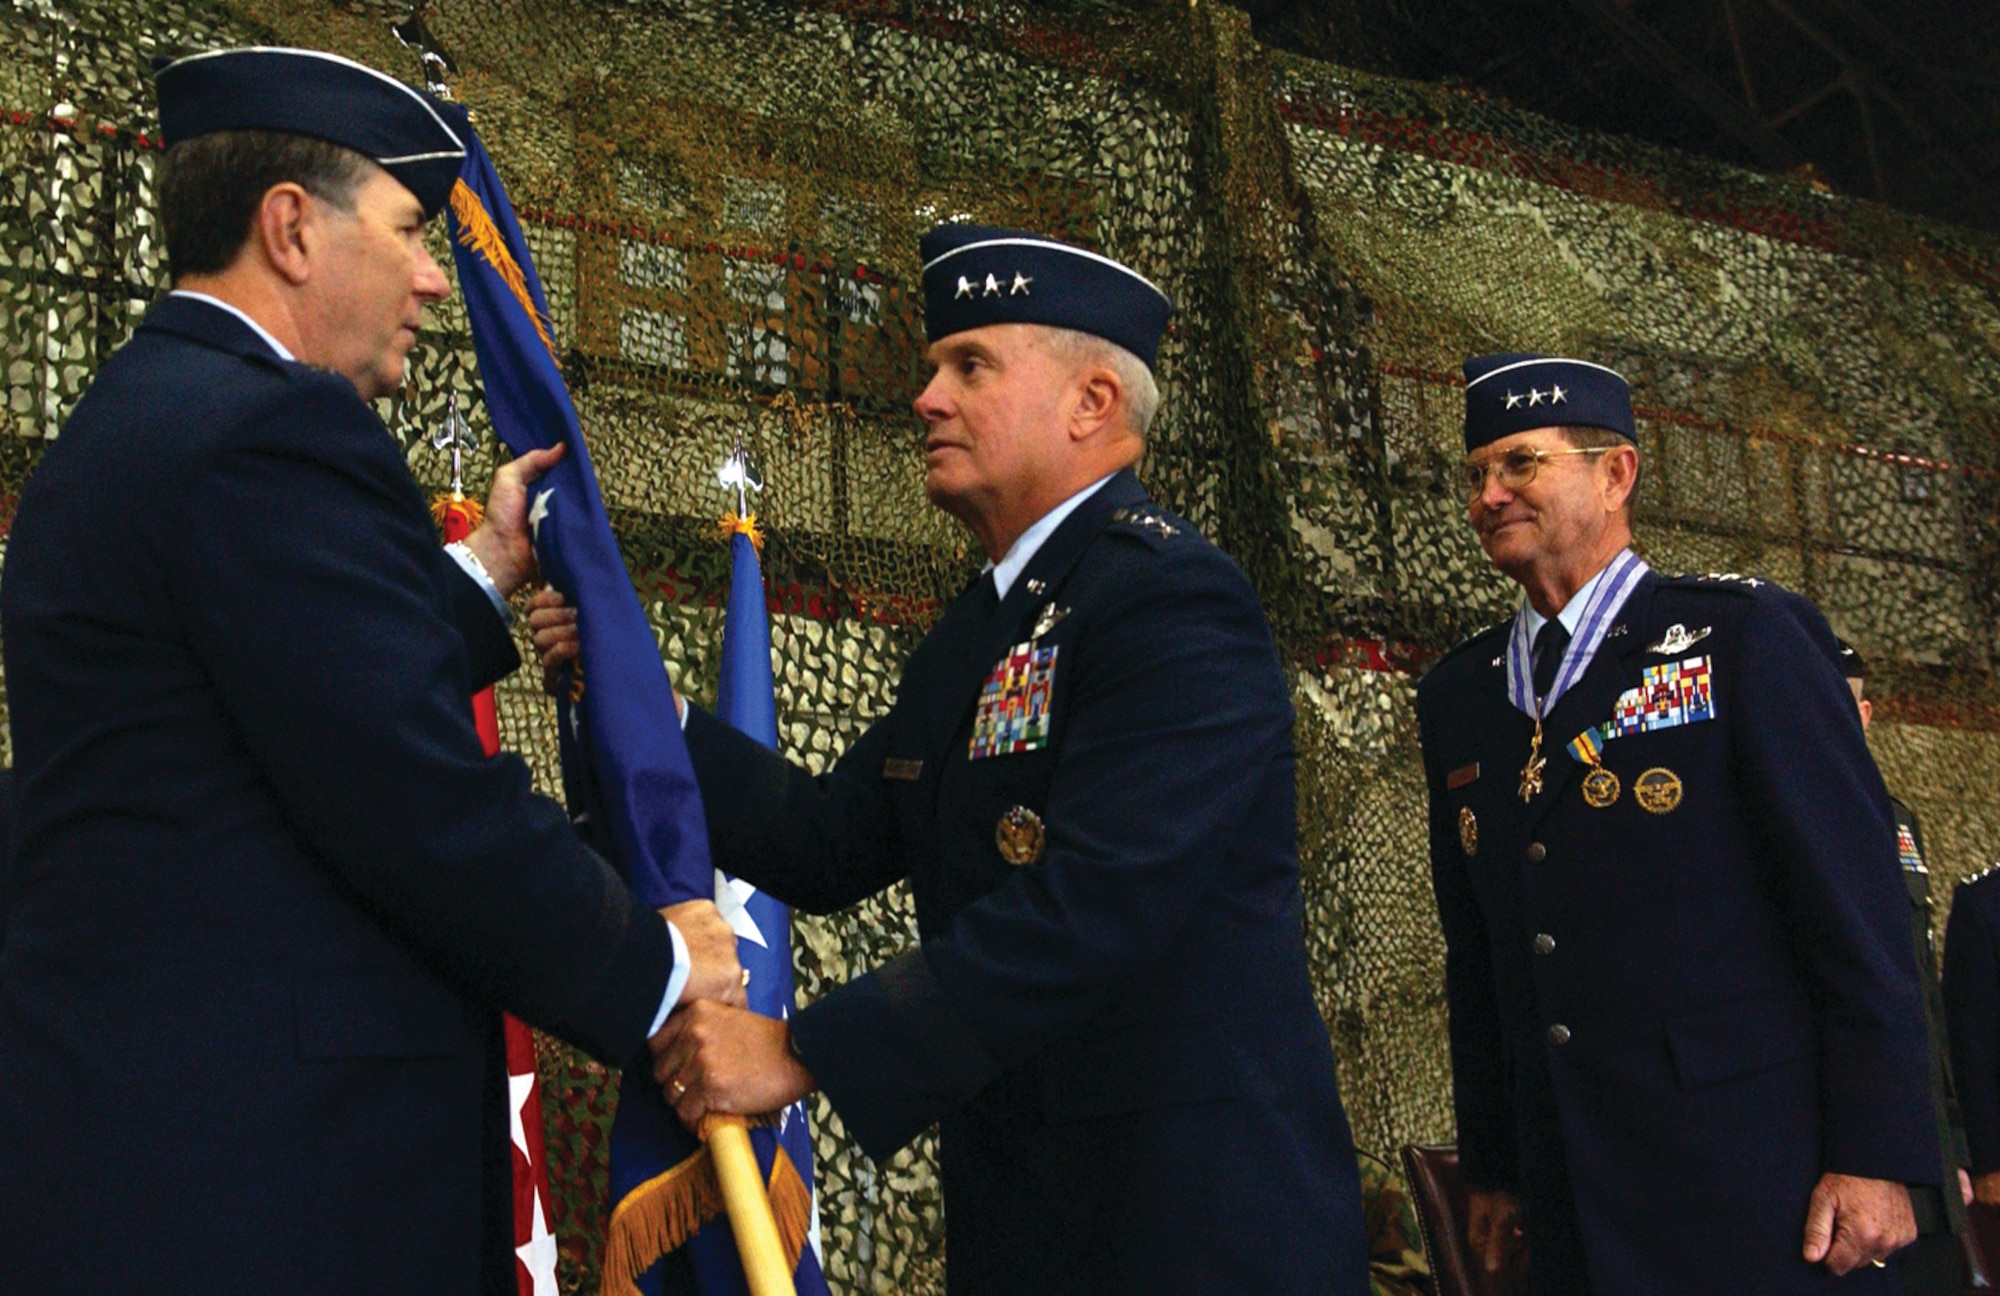 OSAN AIR BASE, Republic of Korea --  Gen. Paul V. Hester, Pacific Air Force Command commander, hands the 7th Air Force guidon to Lt. Gen. Stephen G. Wood, the new 7th Air Force commander, as Lt. Gen. Garry R. Trexler, the former commander, looks on Monday in the 5th Reconnaissance Squadron Blackcat hangar. Lt. Gen. Trexler is retiring after a 36 year career in the Air Force. (U.S. Air Force photo by Senior Airman Eunique Stevens)